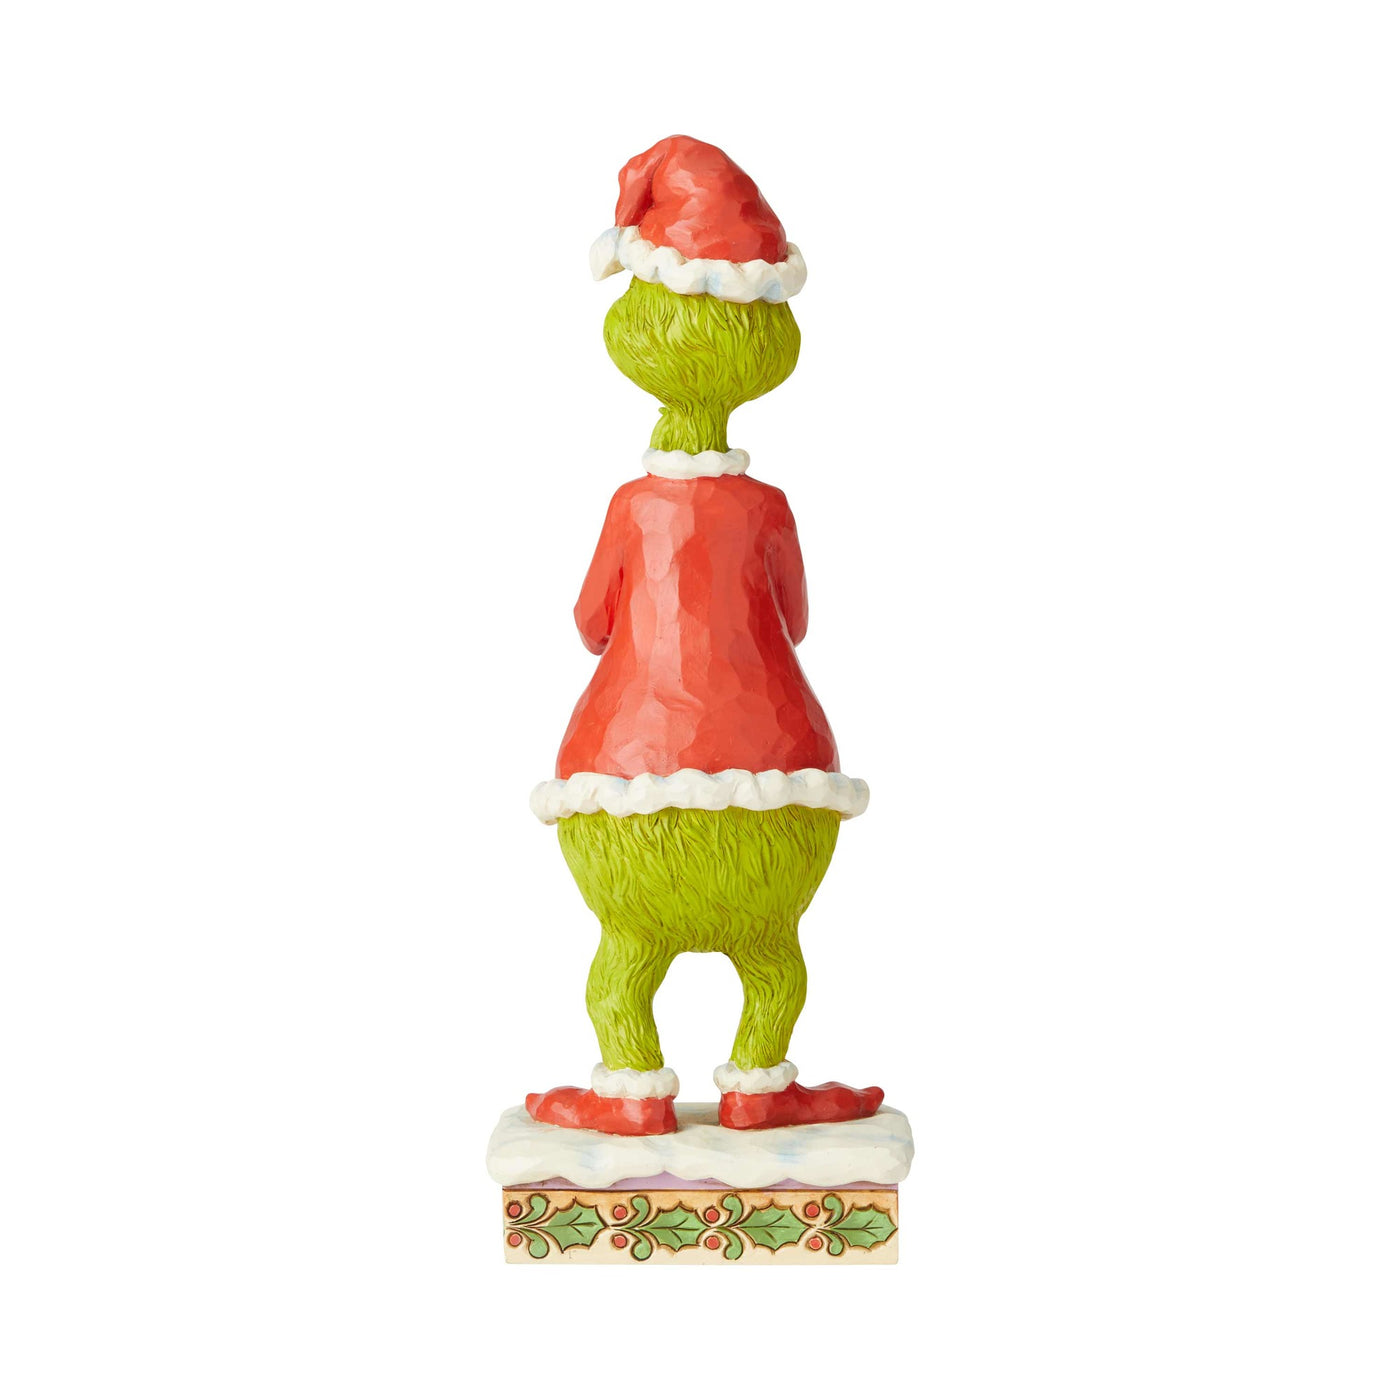 Jim Shore Grinch With Clasped Hands Figurine New with Box